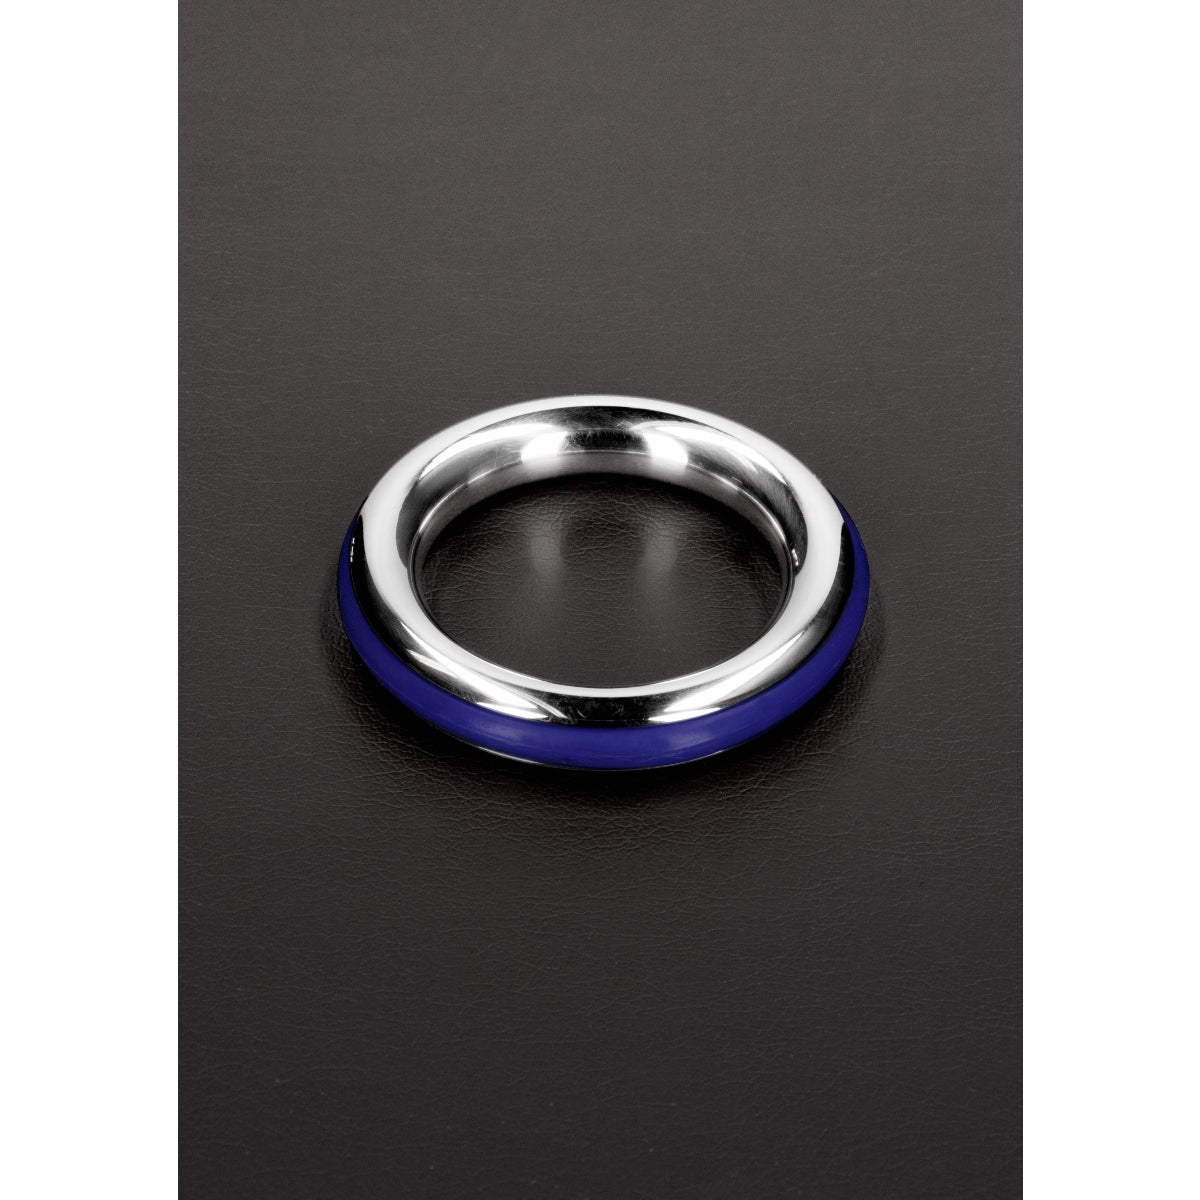 Shots Cazzo Tensions Stainless Steel Cock Ring Blue 50mm (8131775627503)